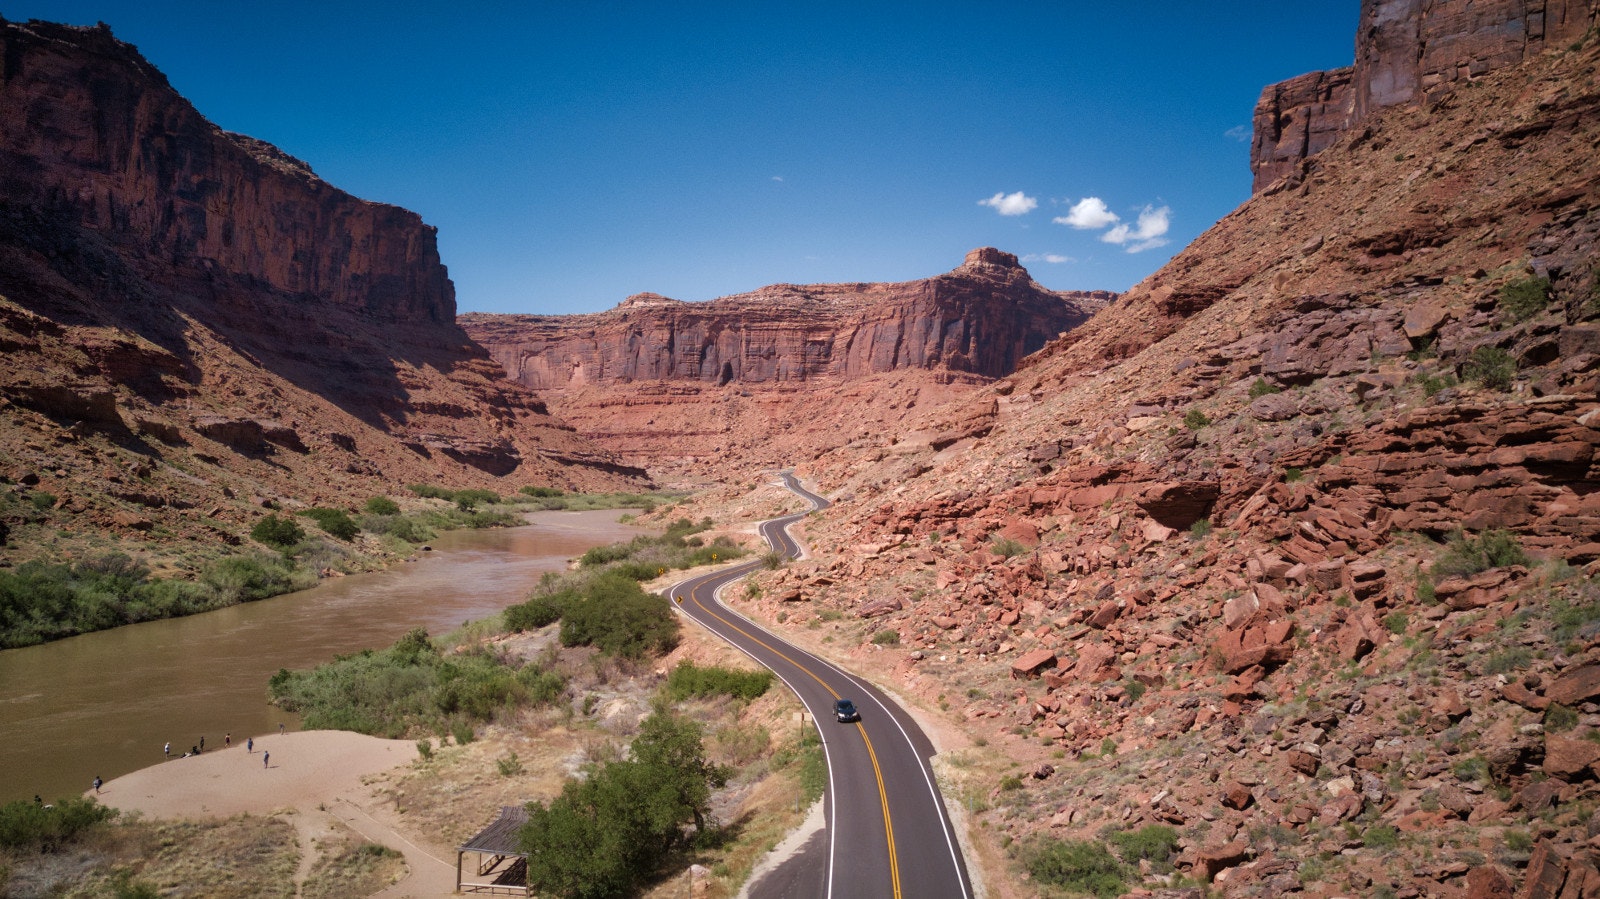 A road winds through a large red canyon, with one car on it. On the left is a river with some people on the edge.